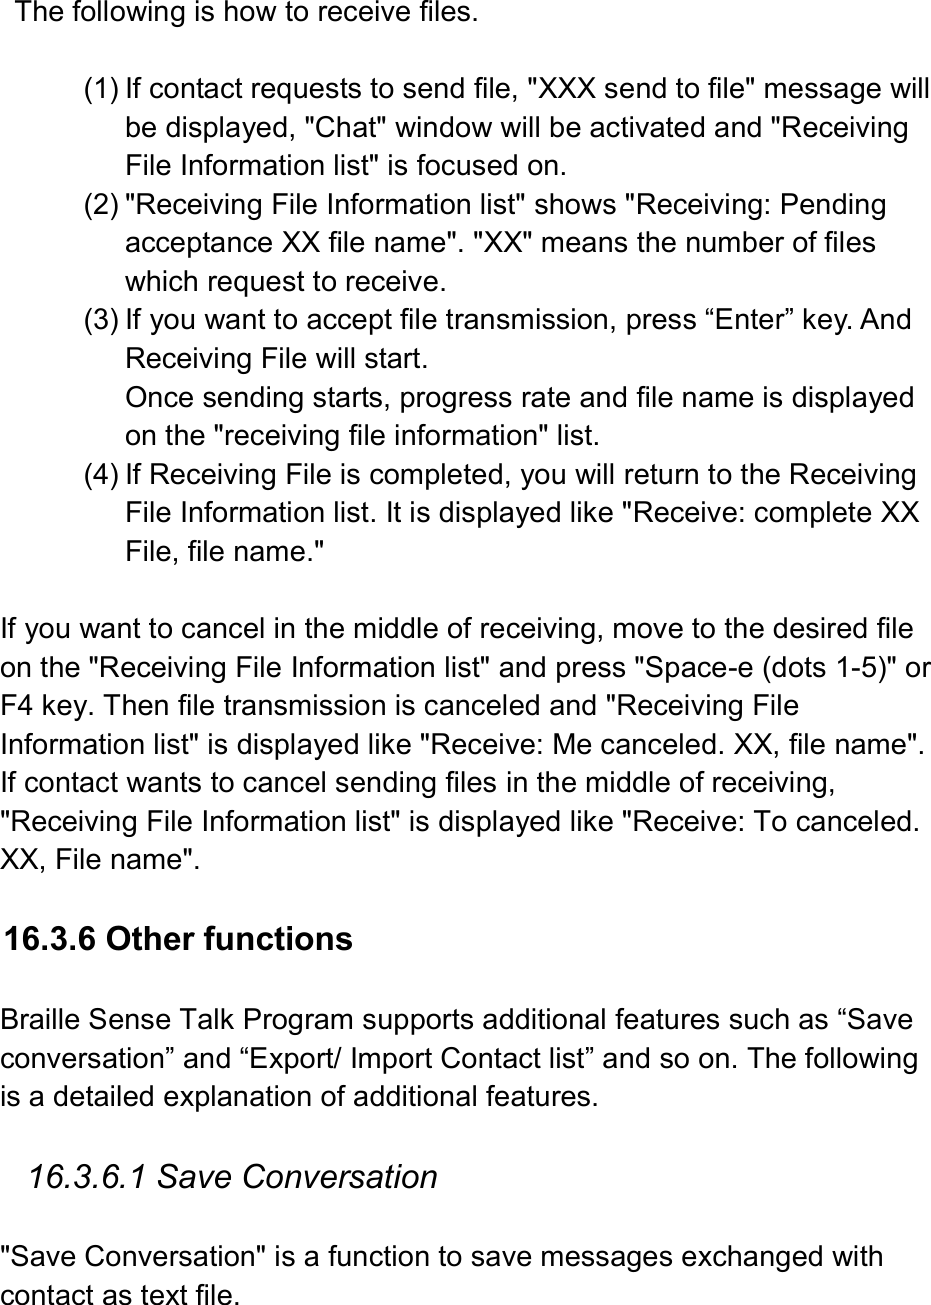  The following is how to receive files.    (1) If contact requests to send file, &quot;XXX send to file&quot; message will be displayed, &quot;Chat&quot; window will be activated and &quot;Receiving File Information list&quot; is focused on.   (2) &quot;Receiving File Information list&quot; shows &quot;Receiving: Pending acceptance XX file name&quot;. &quot;XX&quot; means the number of files which request to receive. (3) If you want to accept file transmission, press “Enter” key. And Receiving File will start.   Once sending starts, progress rate and file name is displayed on the &quot;receiving file information&quot; list.   (4) If Receiving File is completed, you will return to the Receiving File Information list. It is displayed like &quot;Receive: complete XX File, file name.&quot;    If you want to cancel in the middle of receiving, move to the desired file on the &quot;Receiving File Information list&quot; and press &quot;Space-e (dots 1-5)&quot; or F4 key. Then file transmission is canceled and &quot;Receiving File Information list&quot; is displayed like &quot;Receive: Me canceled. XX, file name&quot;. If contact wants to cancel sending files in the middle of receiving, &quot;Receiving File Information list&quot; is displayed like &quot;Receive: To canceled. XX, File name&quot;.  16.3.6 Other functions    Braille Sense Talk Program supports additional features such as “Save conversation” and “Export/ Import Contact list” and so on. The following is a detailed explanation of additional features.    16.3.6.1 Save Conversation  &quot;Save Conversation&quot; is a function to save messages exchanged with contact as text file. 